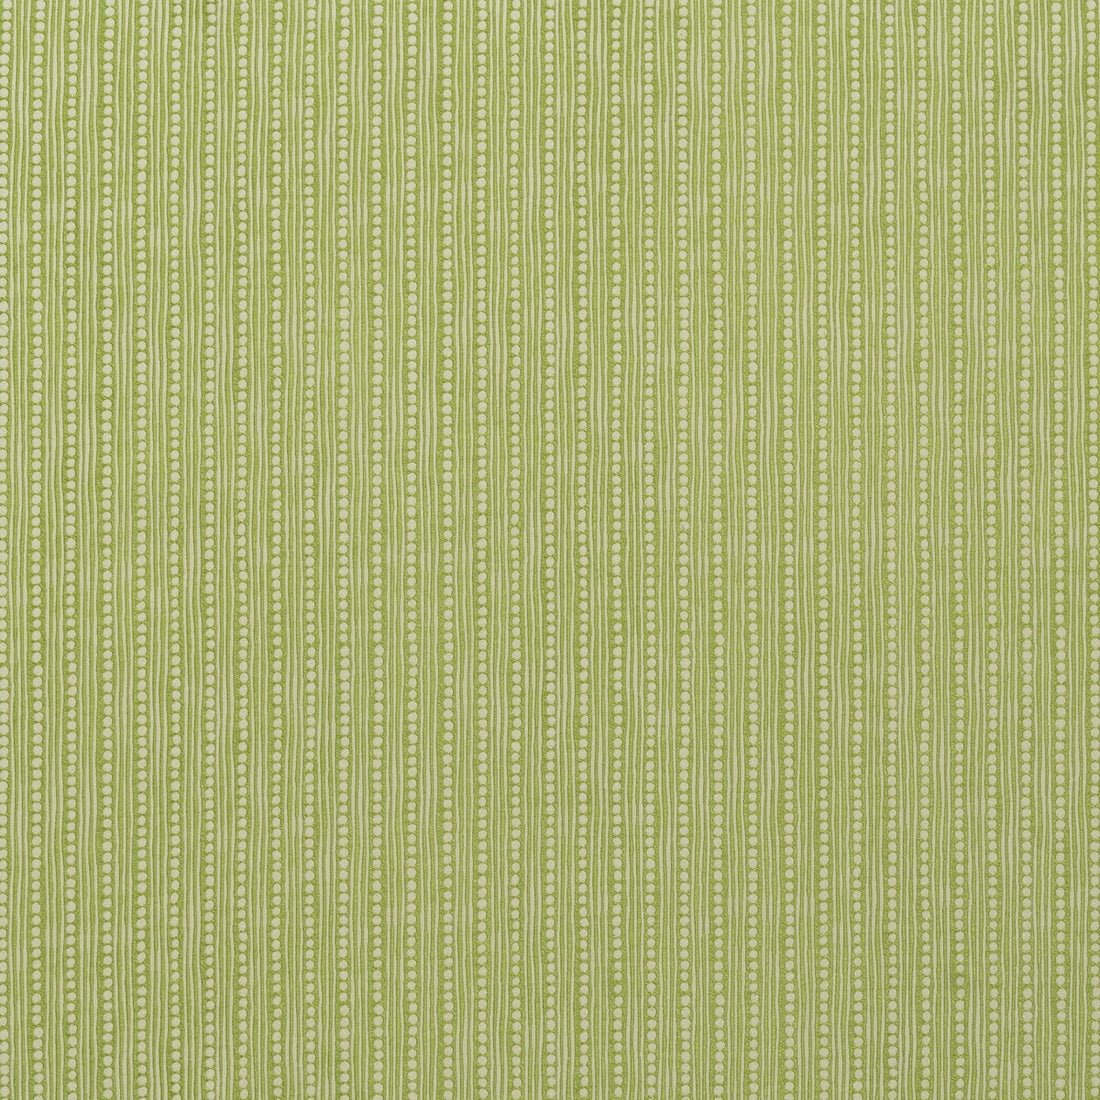 Wickham fabric in lime color - pattern BFC-3678.314.0 - by Lee Jofa in the Blithfield collection